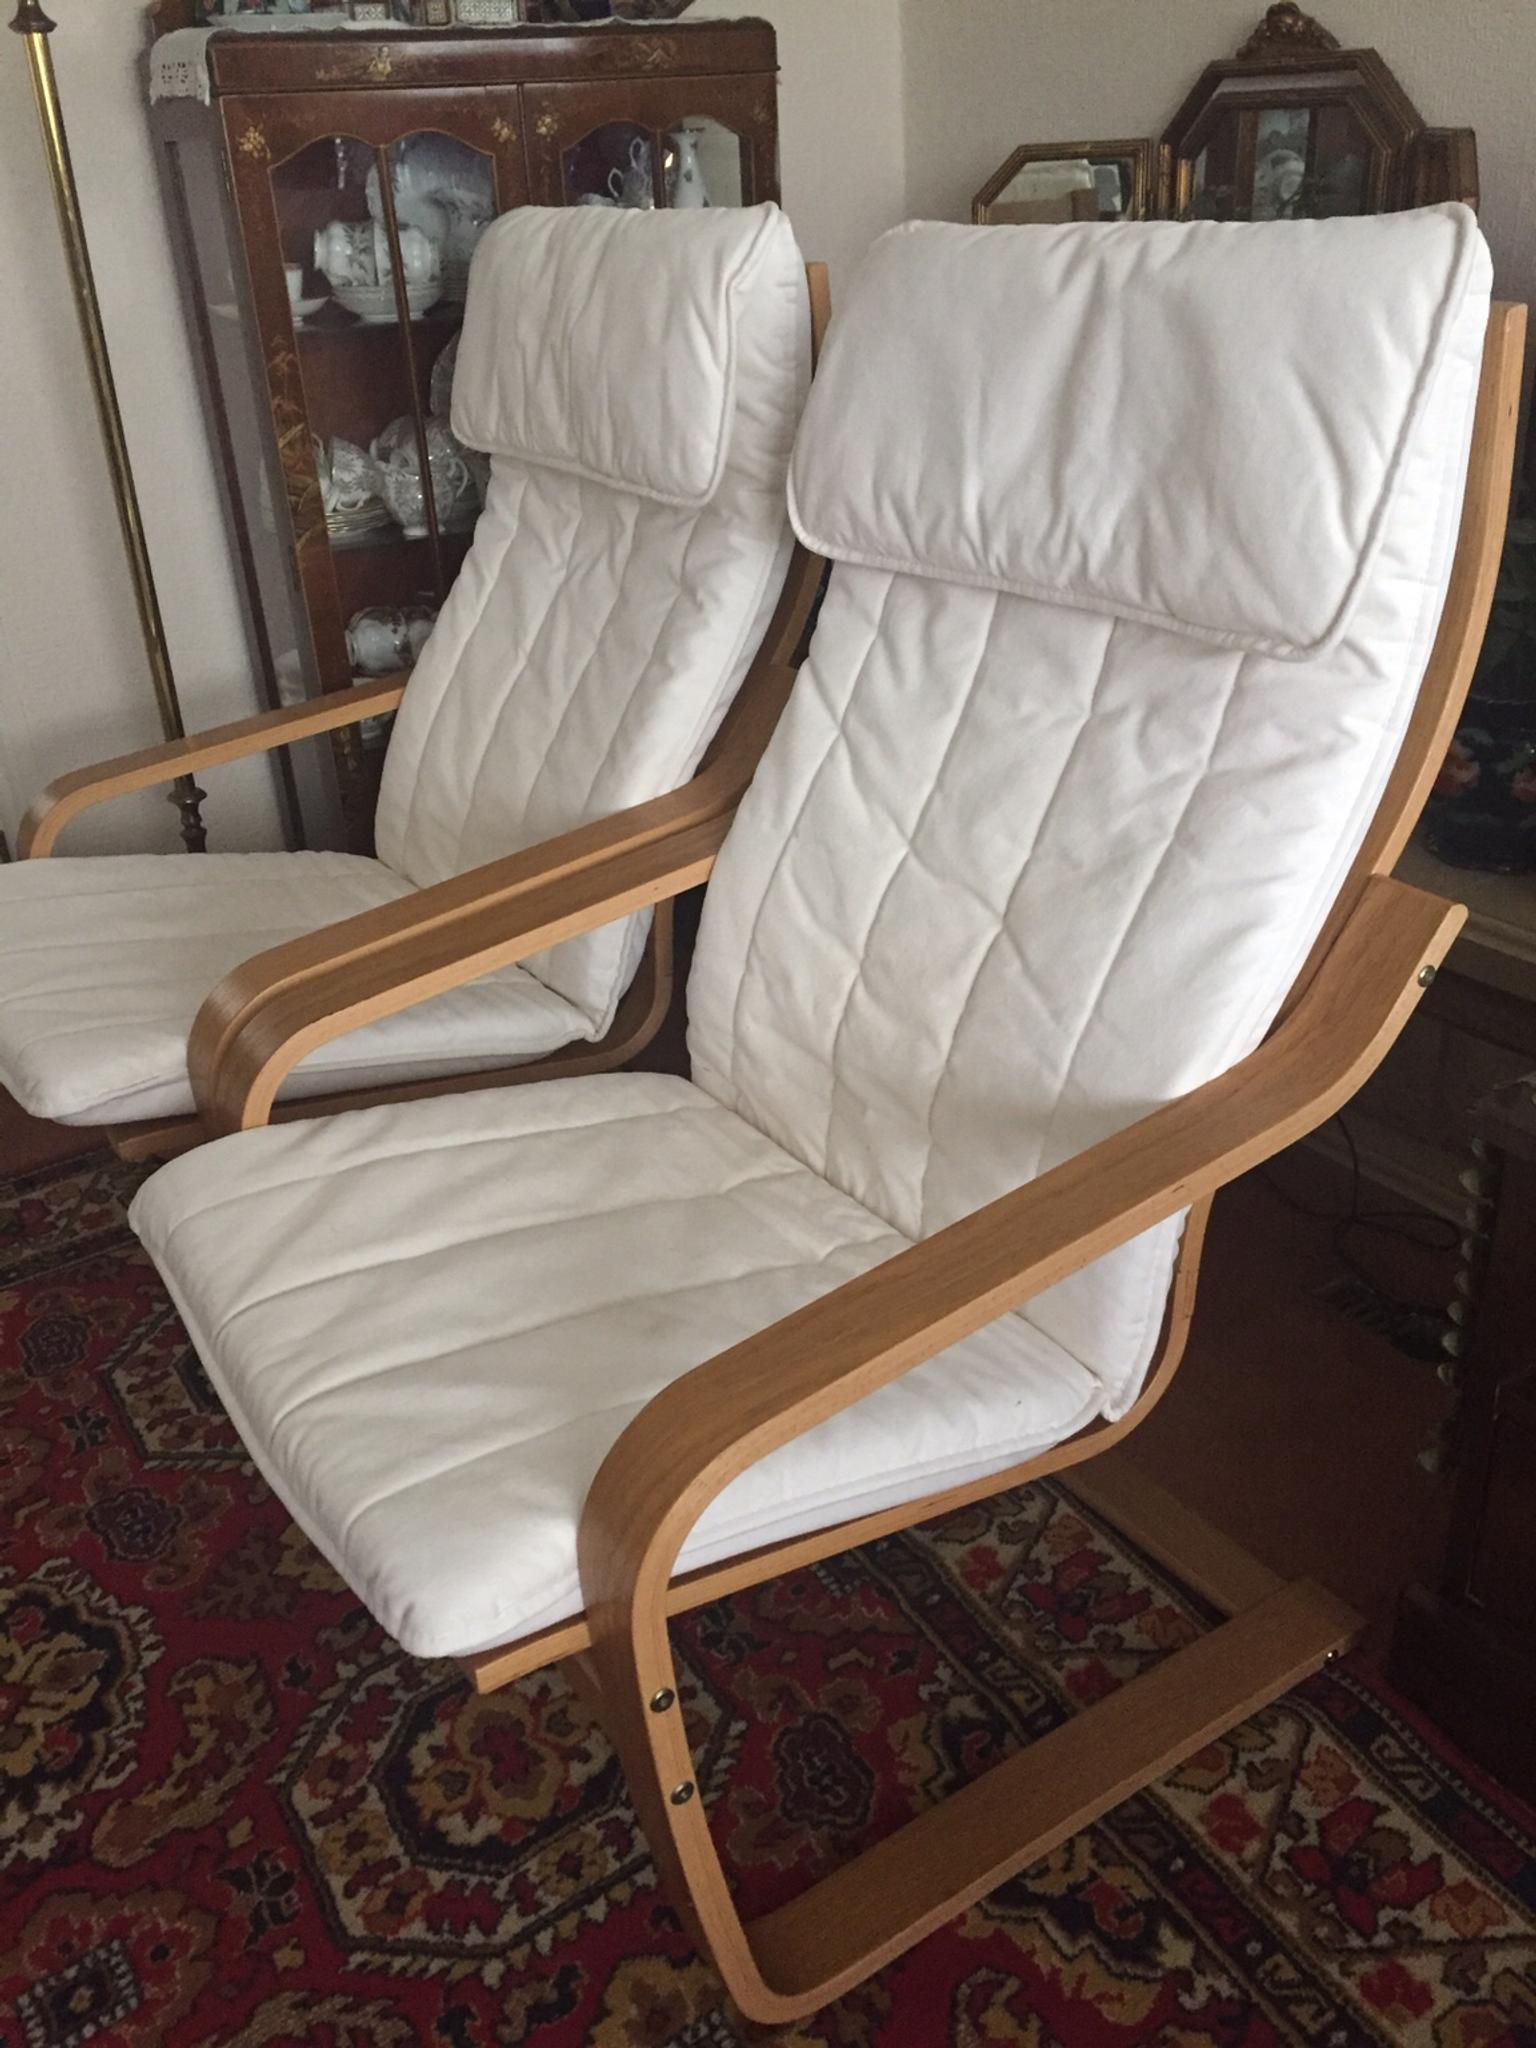 Ikea Poang Chairs In Gl51 Tewkesbury For 50 00 For Sale Shpock